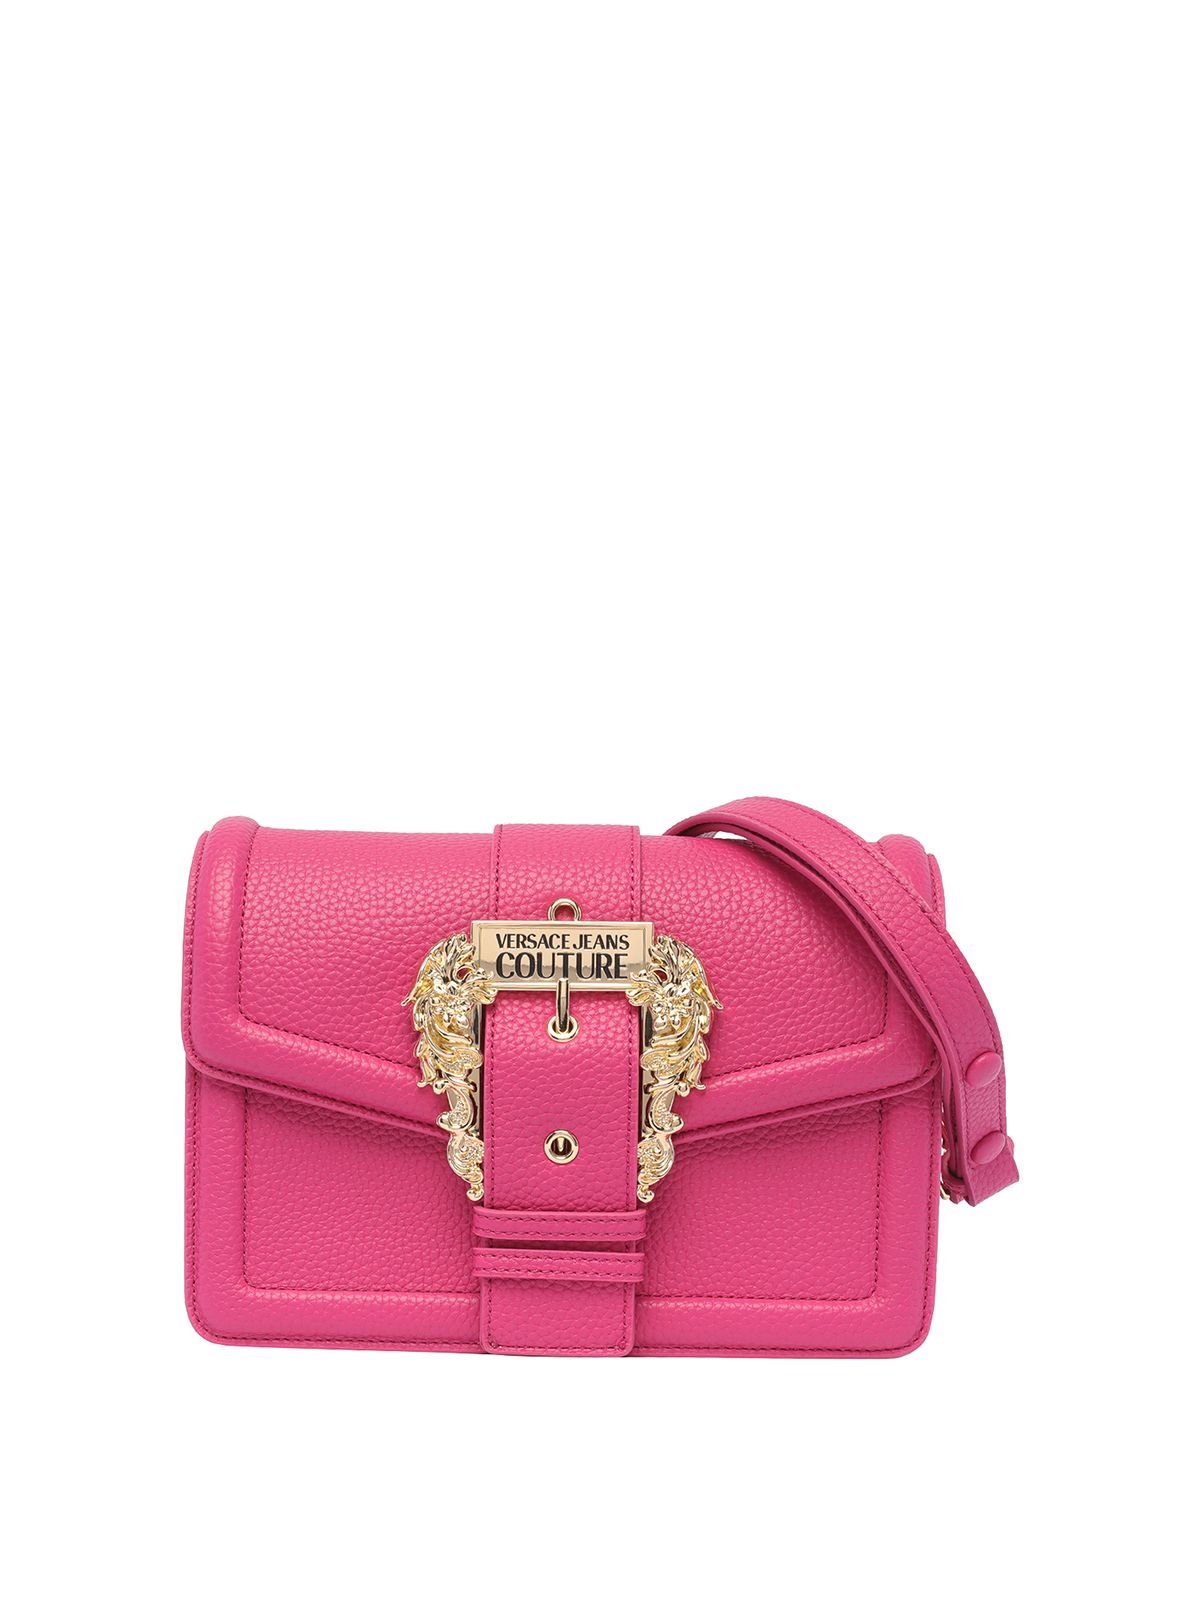 Versace Jeans Couture Shoulder Bag Couture 1 In Multicolour